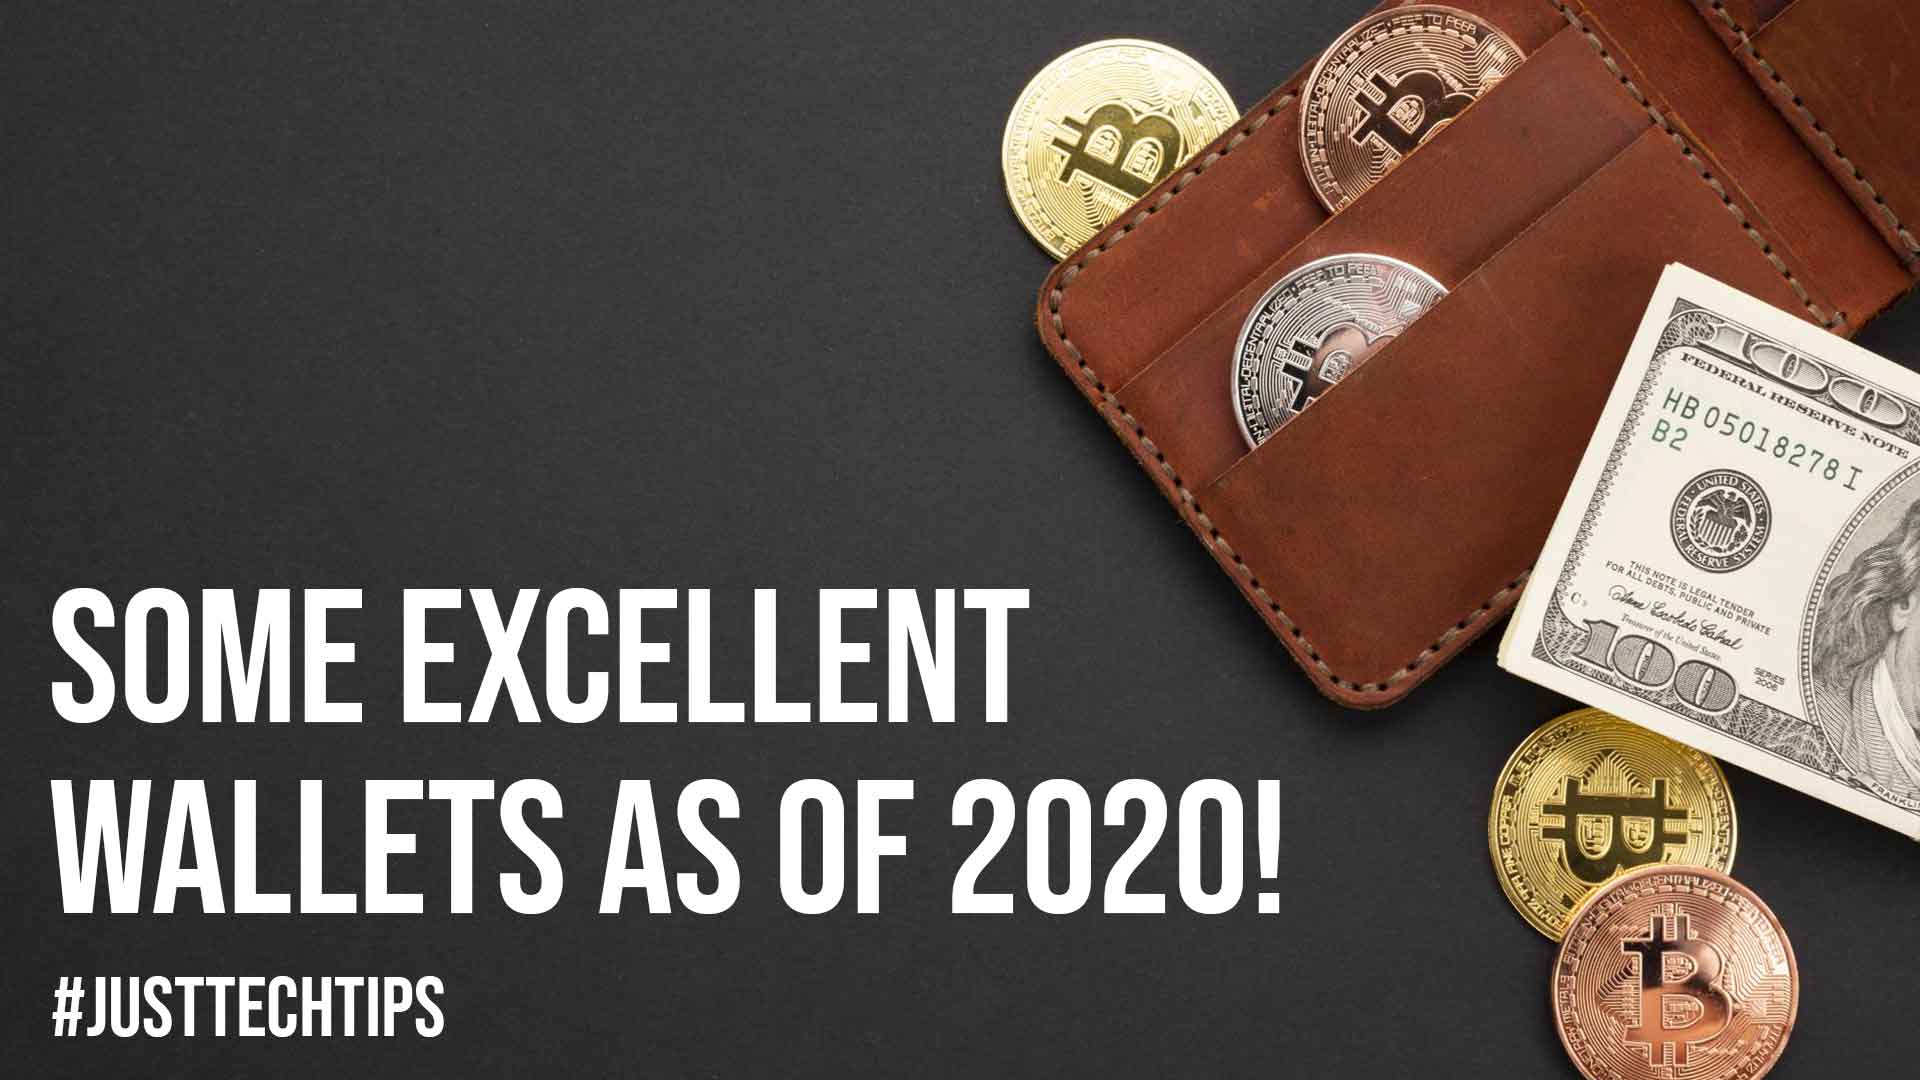 Some Excellent Wallets as of 2020